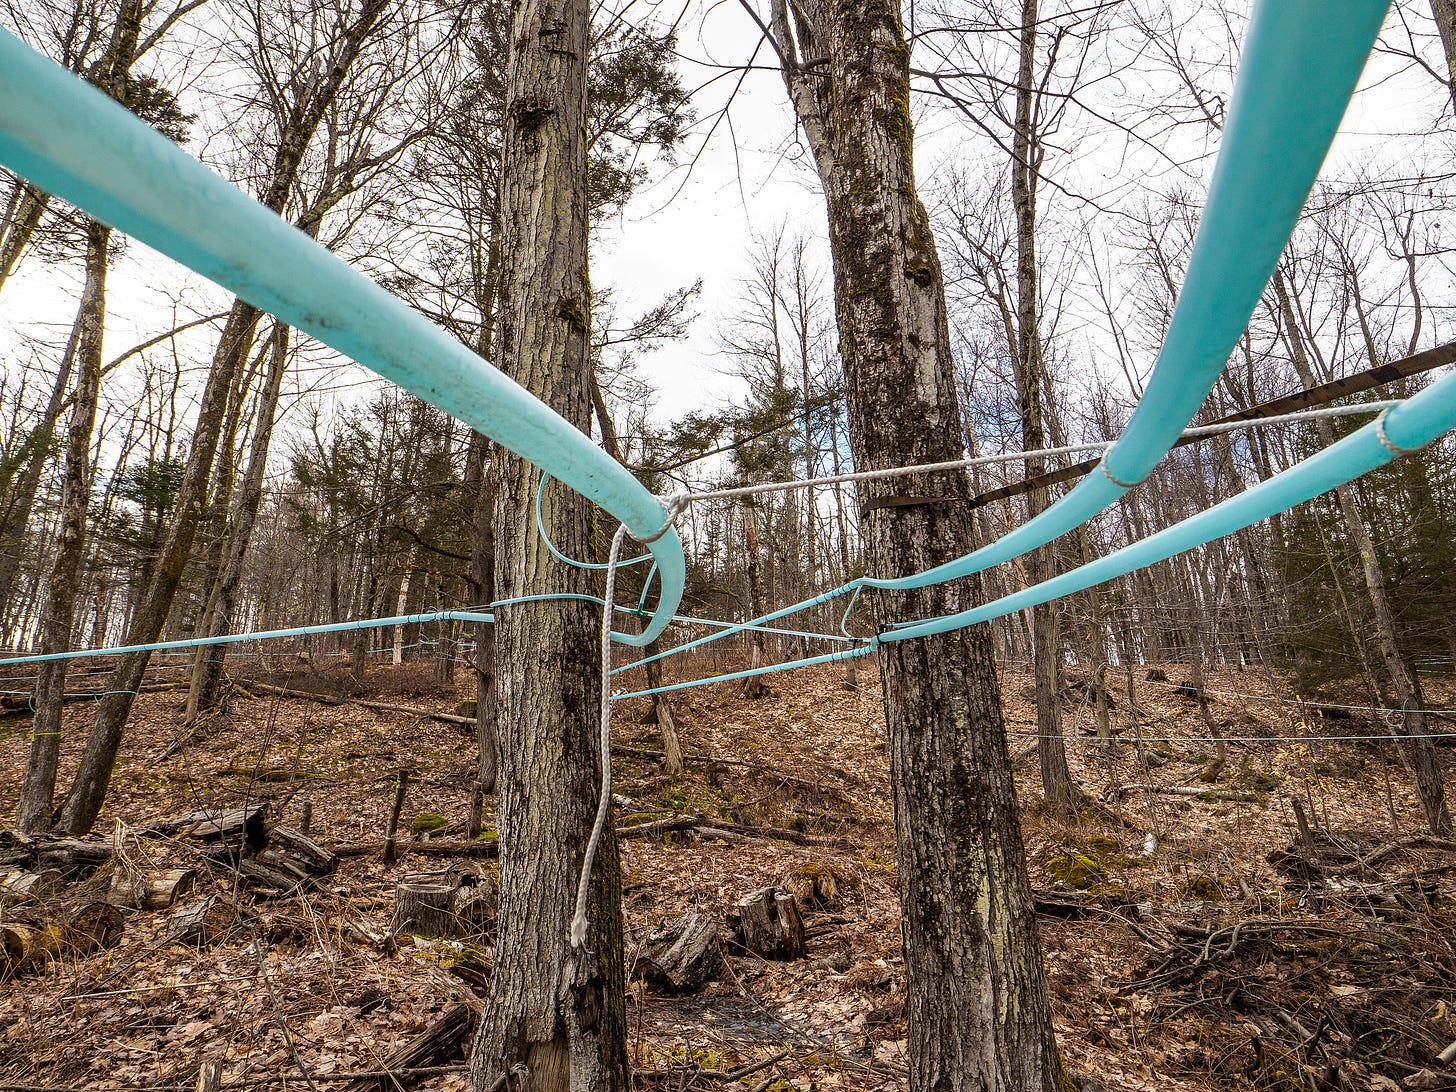 Sap lines for boiling Maple Syrup